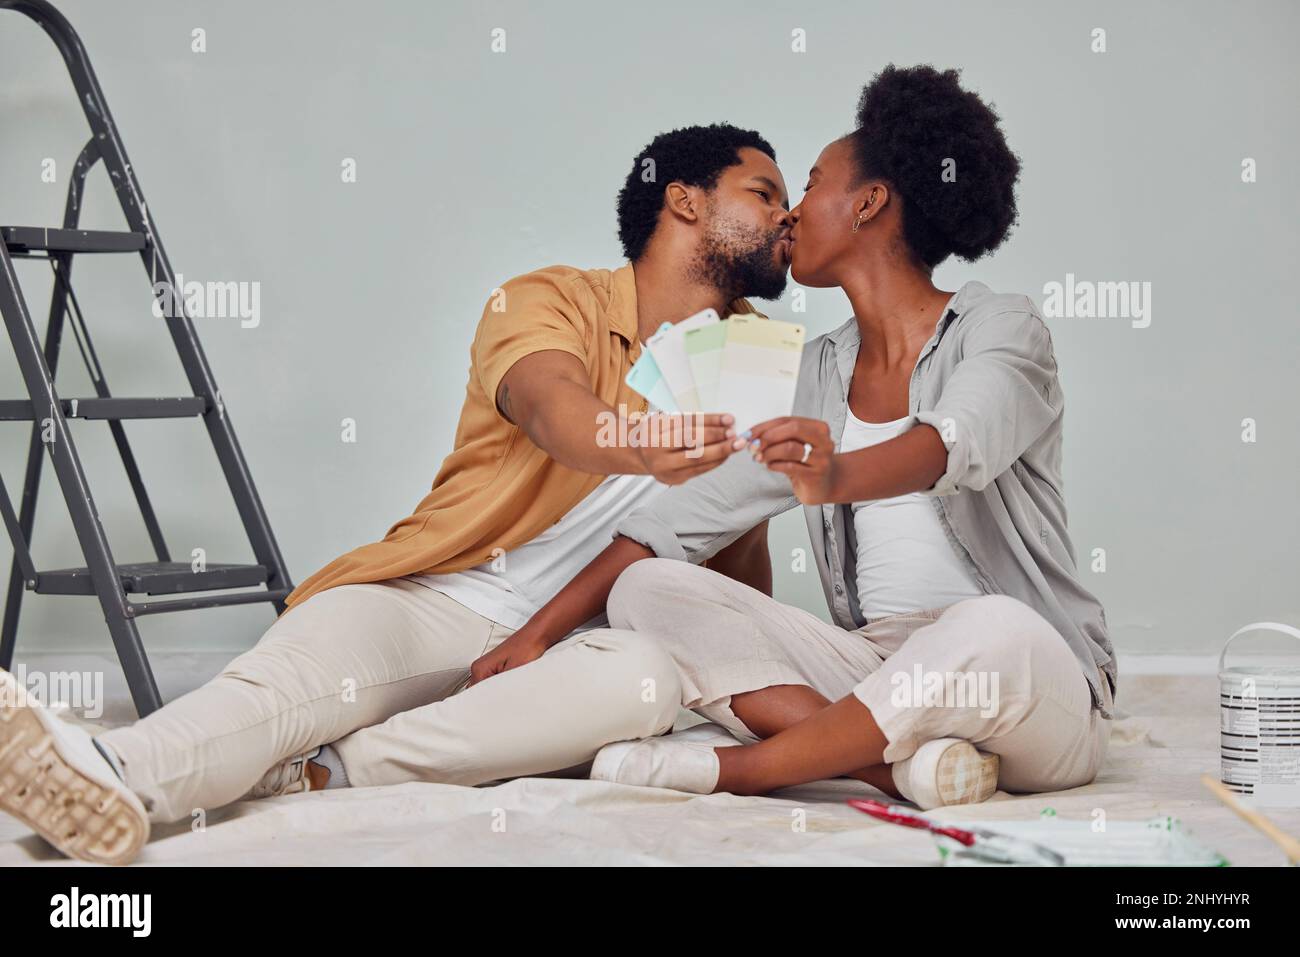 Painting color, love or black couple kiss in home renovation, diy or house remodel together by apartment ladder. Design, choices or African man Stock Photo